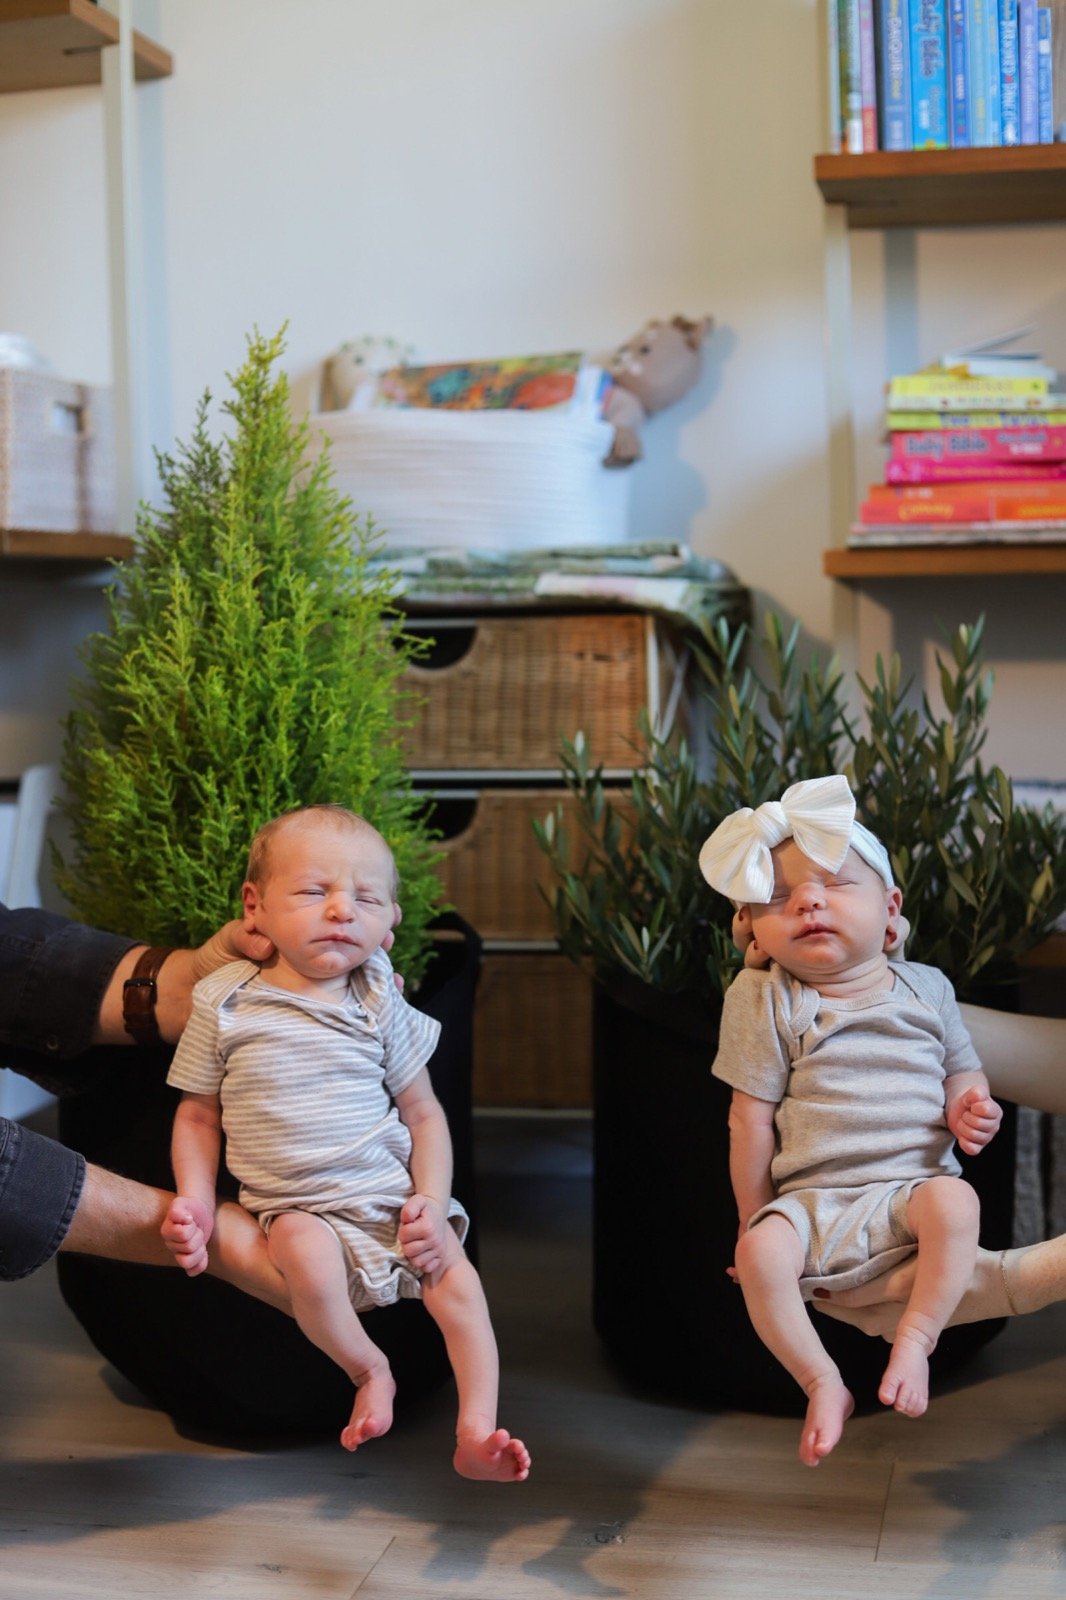 introducing the mulenos twins, lments of style, di-di twins, twin pregnancy, boy-girl twins, baby name inspiration, baby name ideas, unique baby names, cyprus, olive, cypress tree, olive bush